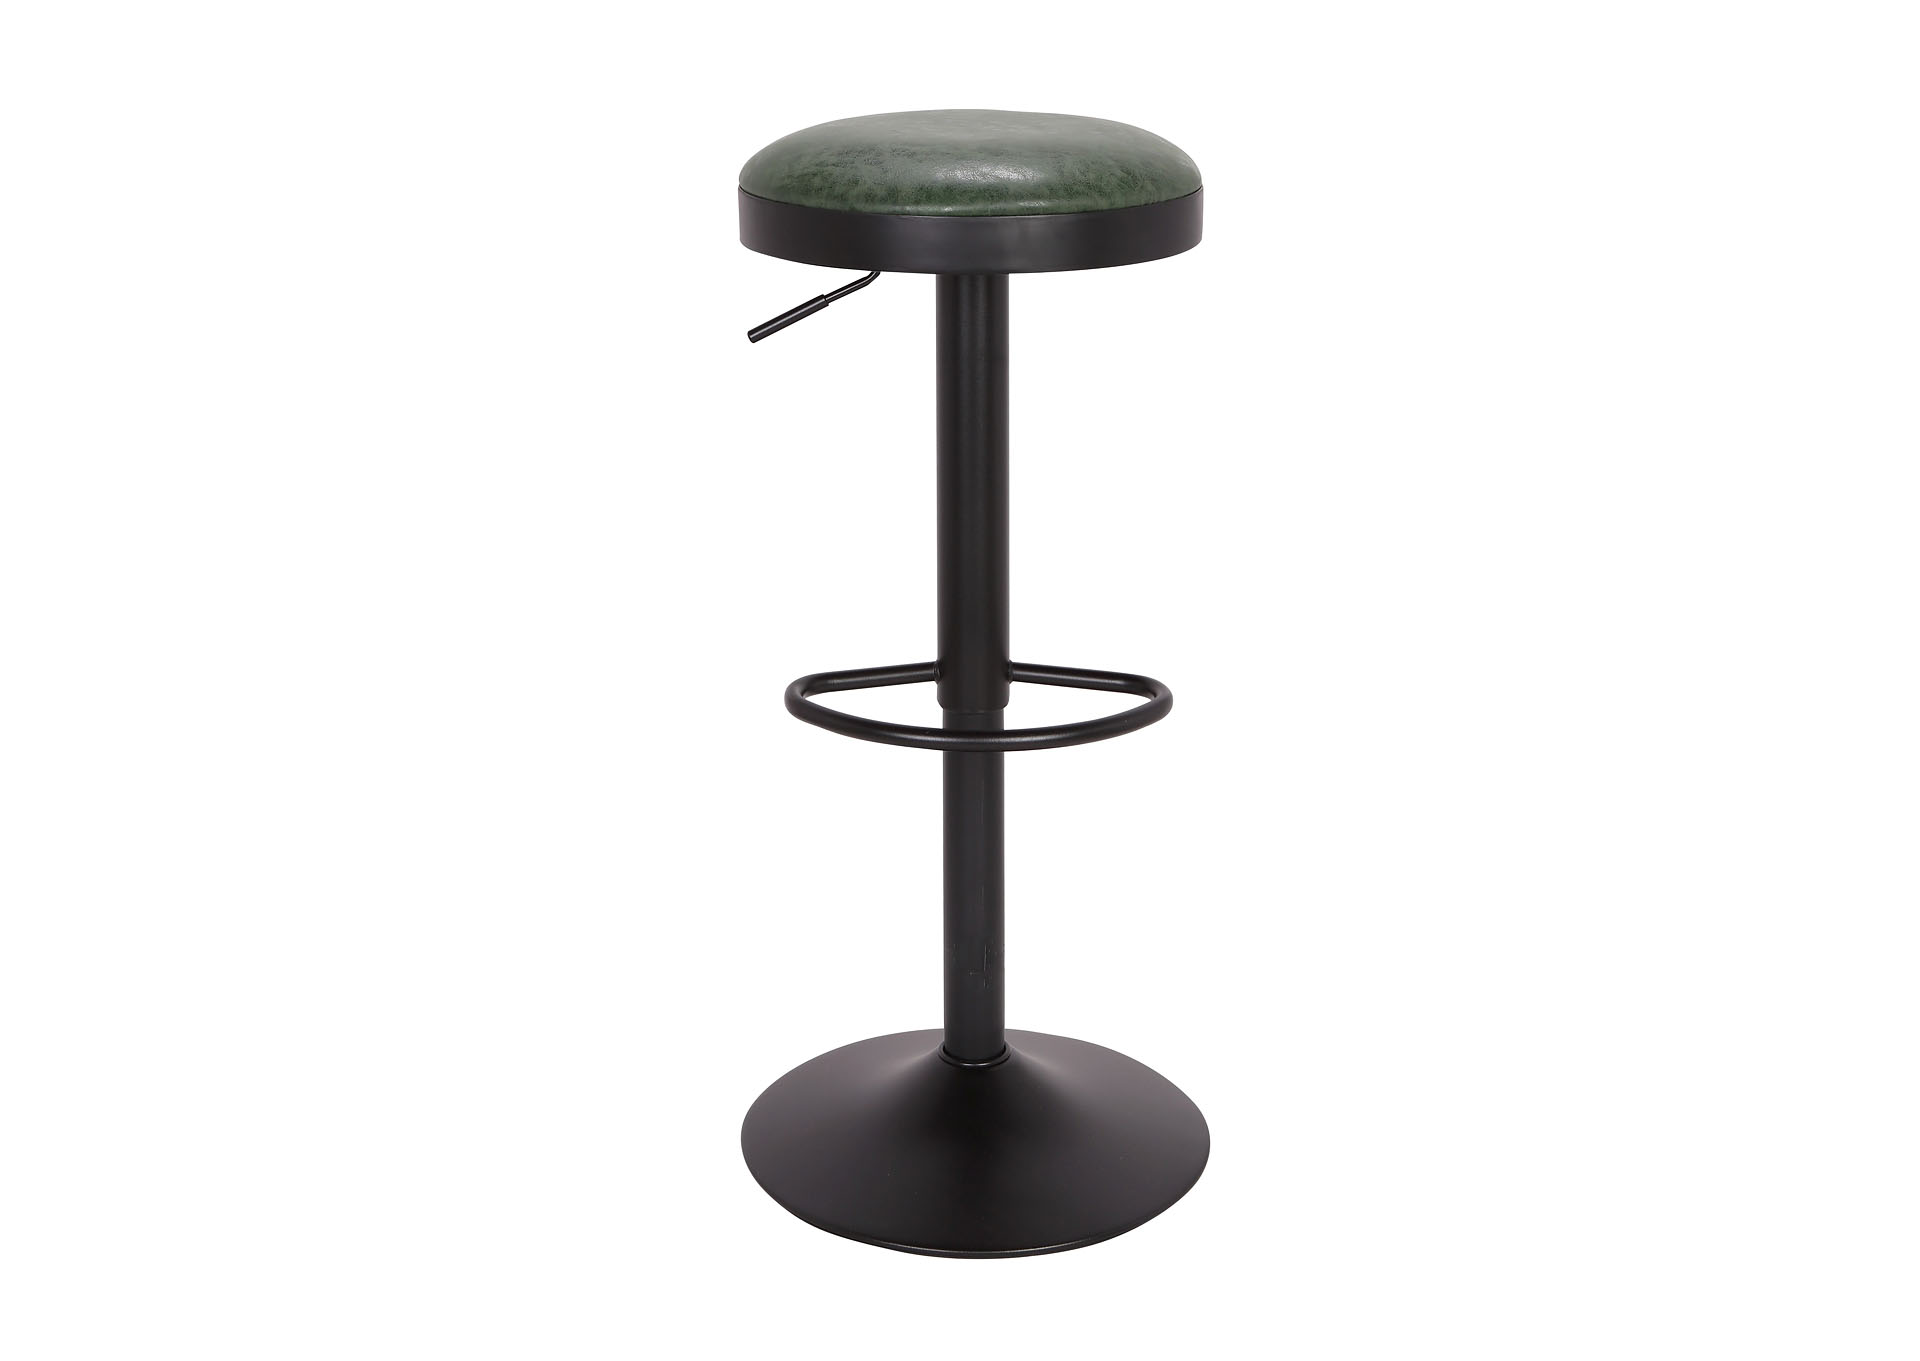 Green Vintage Style Backless Adjustable Stool,Chintaly Imports